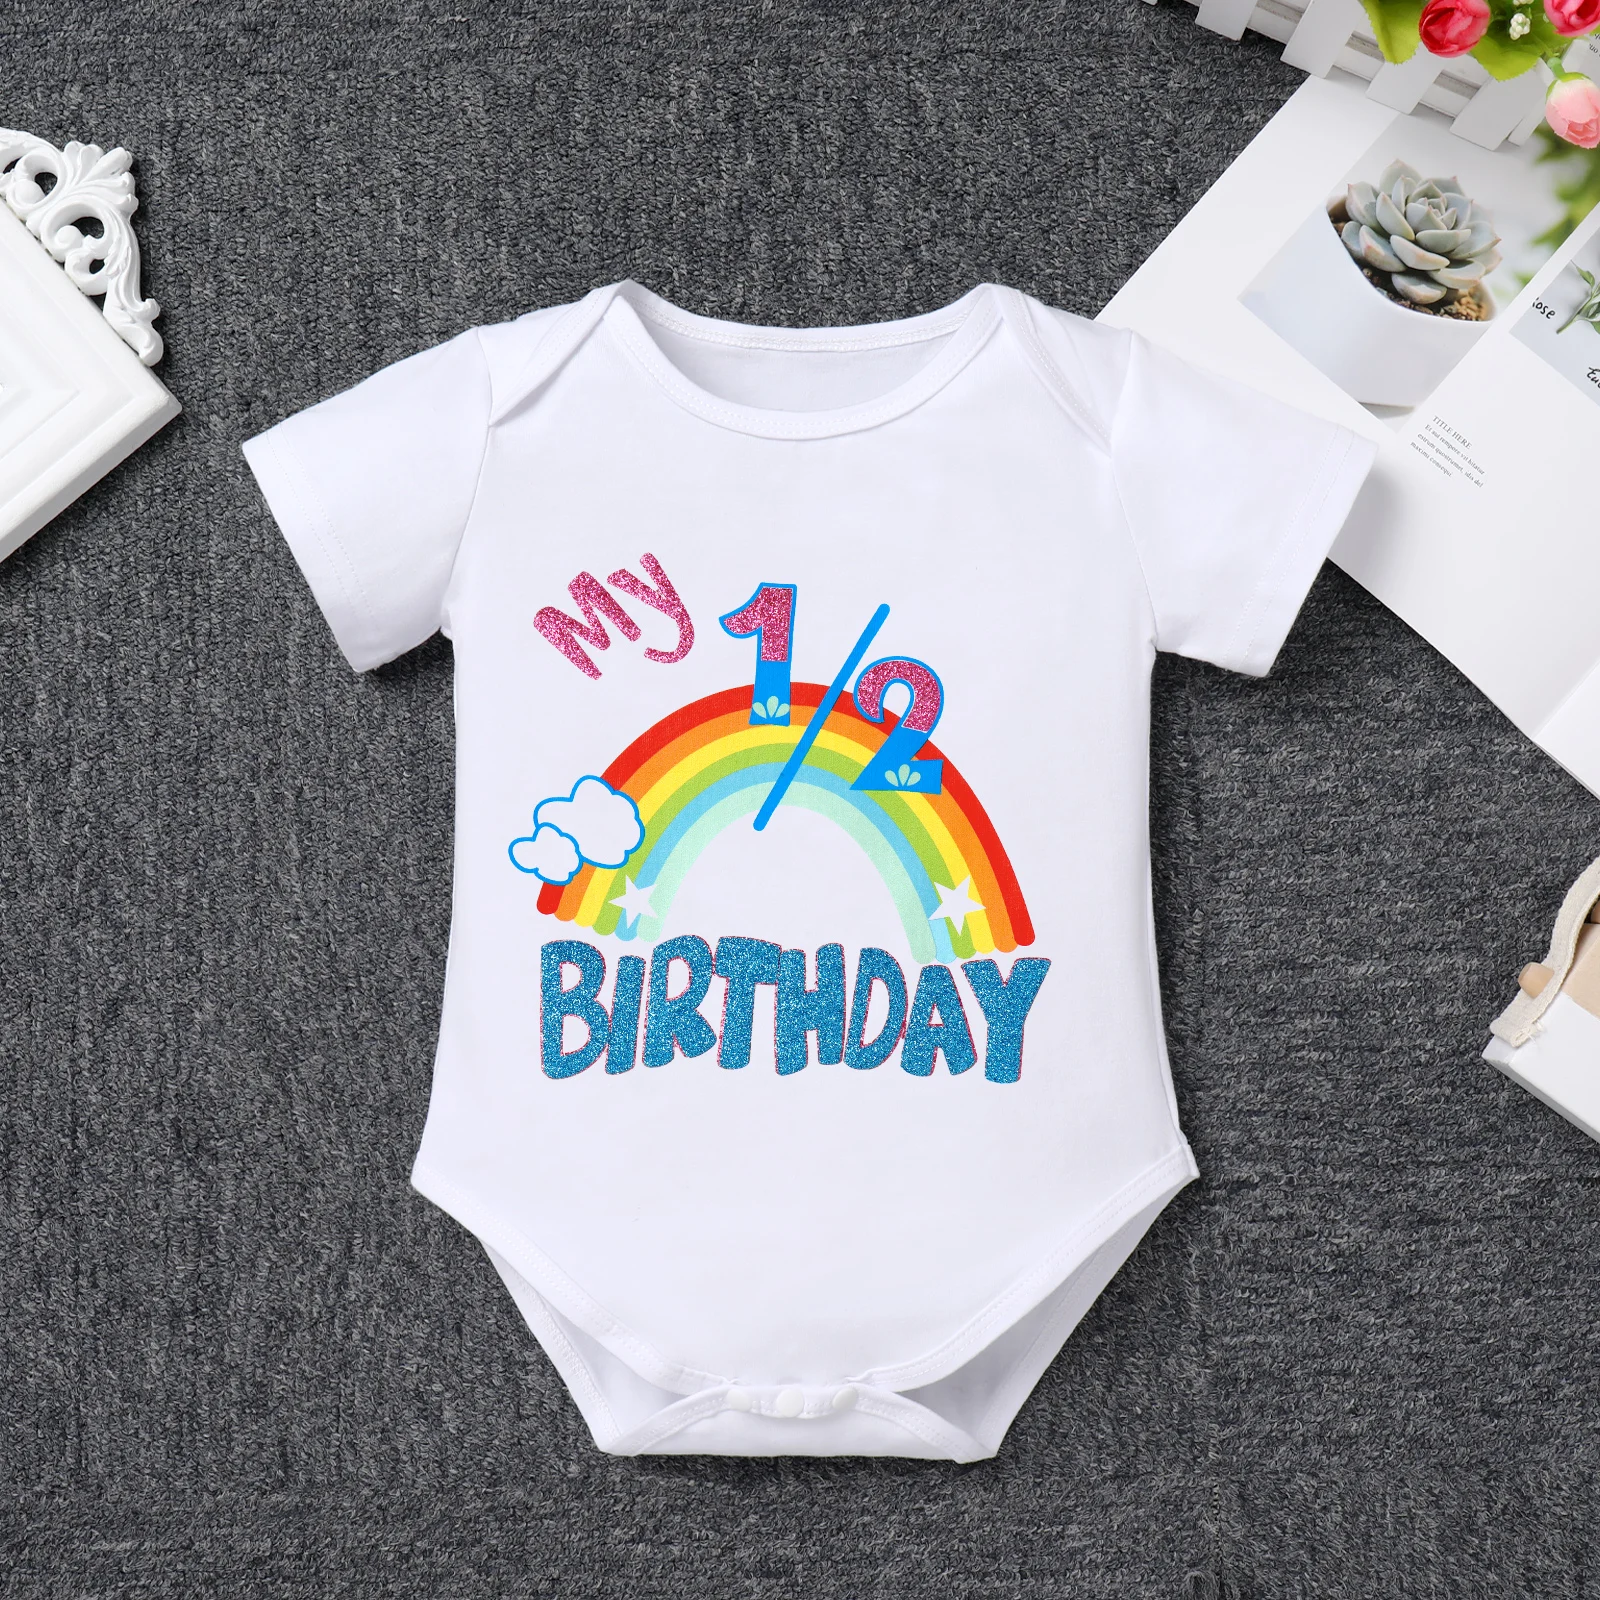 6-24M Baby Girls Romper Birthday Party Glittery Letters Rainbow Printed Romper With Headband Newborn Infantil Tutu 2pcs Outfit